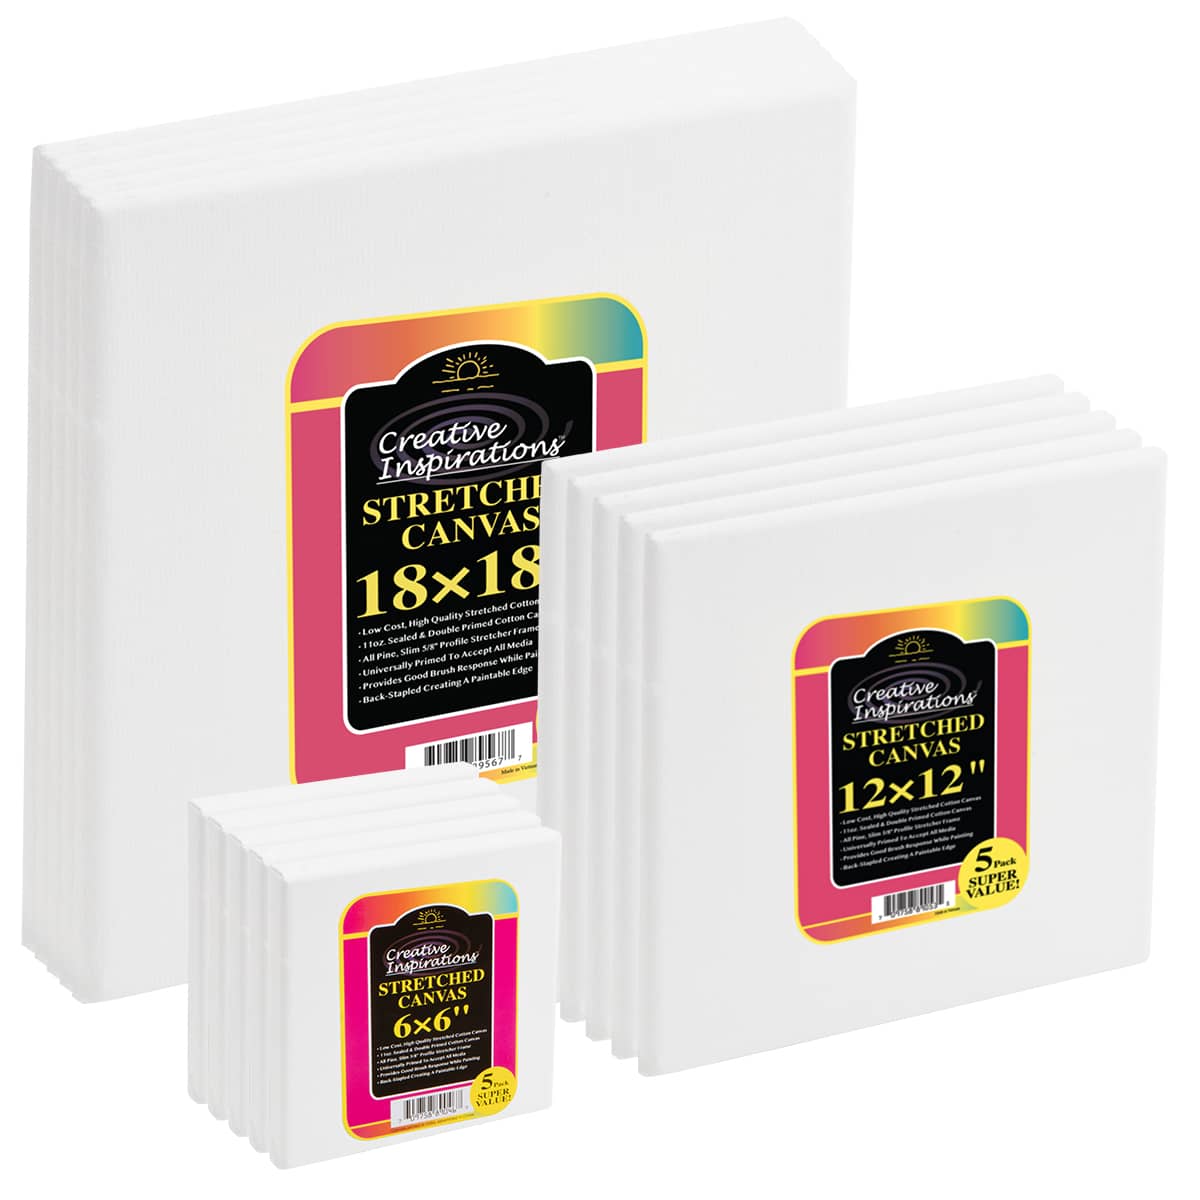 Creative Inspirations A Square Deal Set of 15 Stretched Canvas 